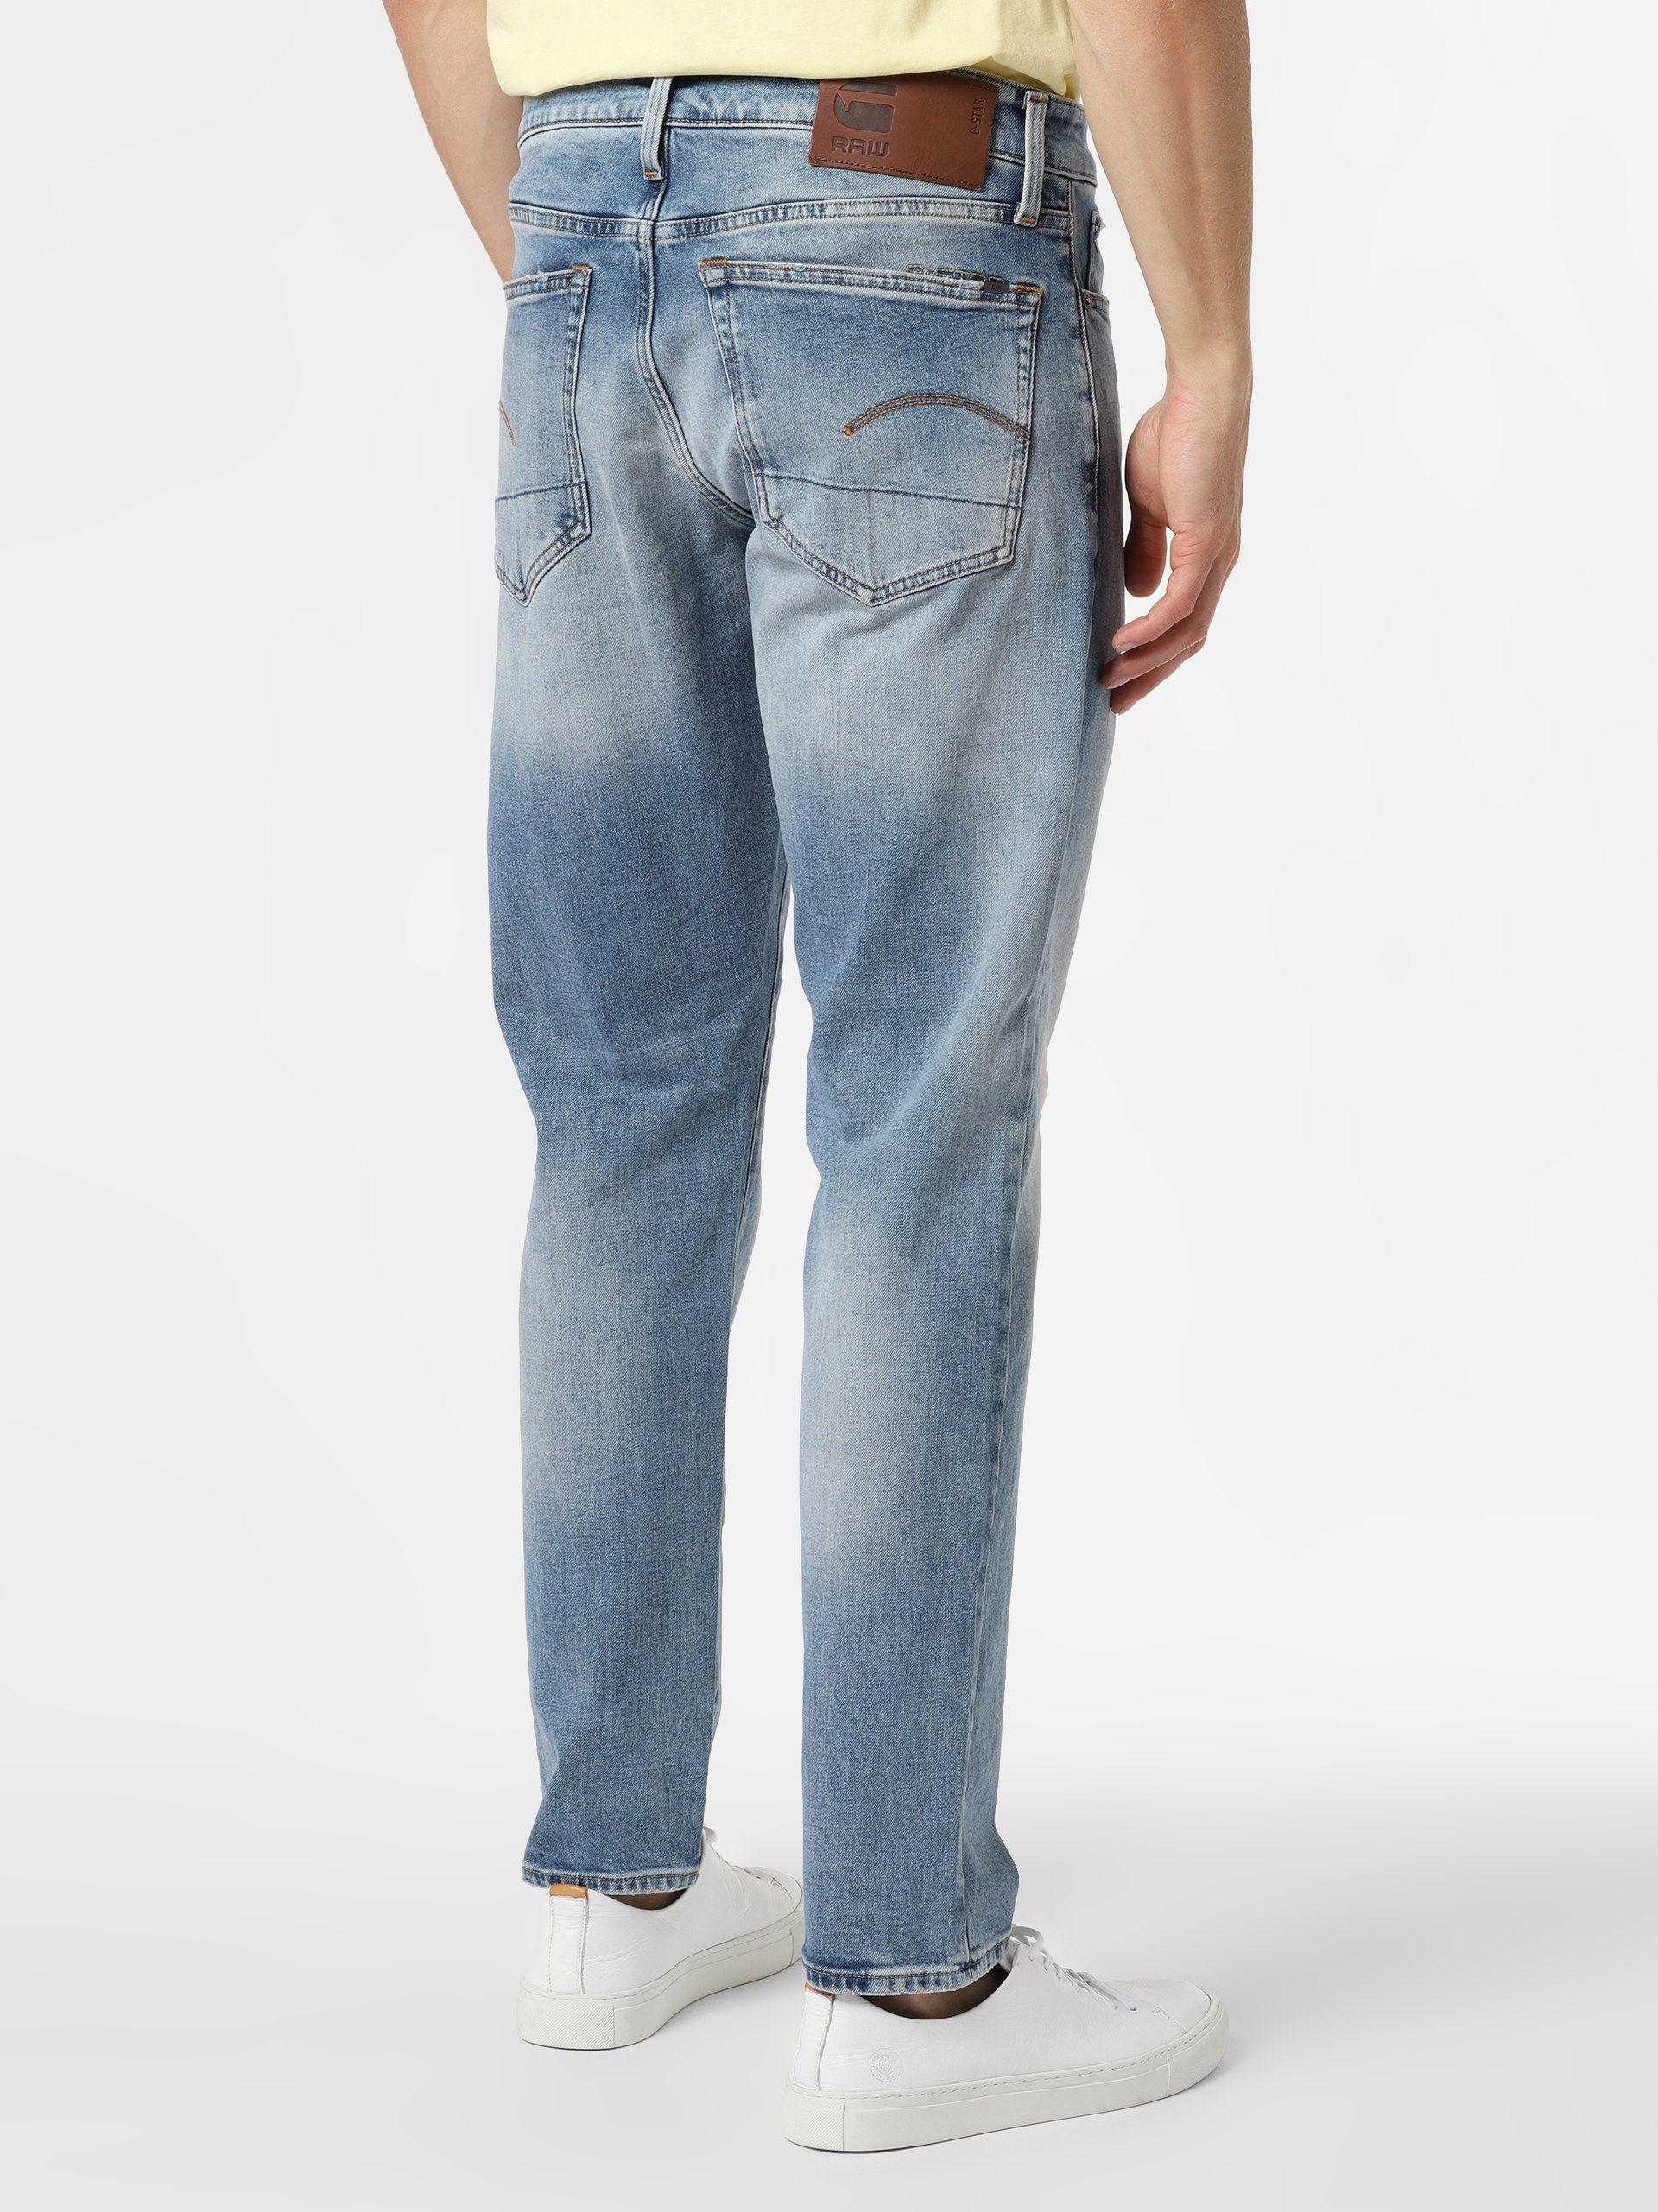 RAW Straight-Jeans G-Star bleached